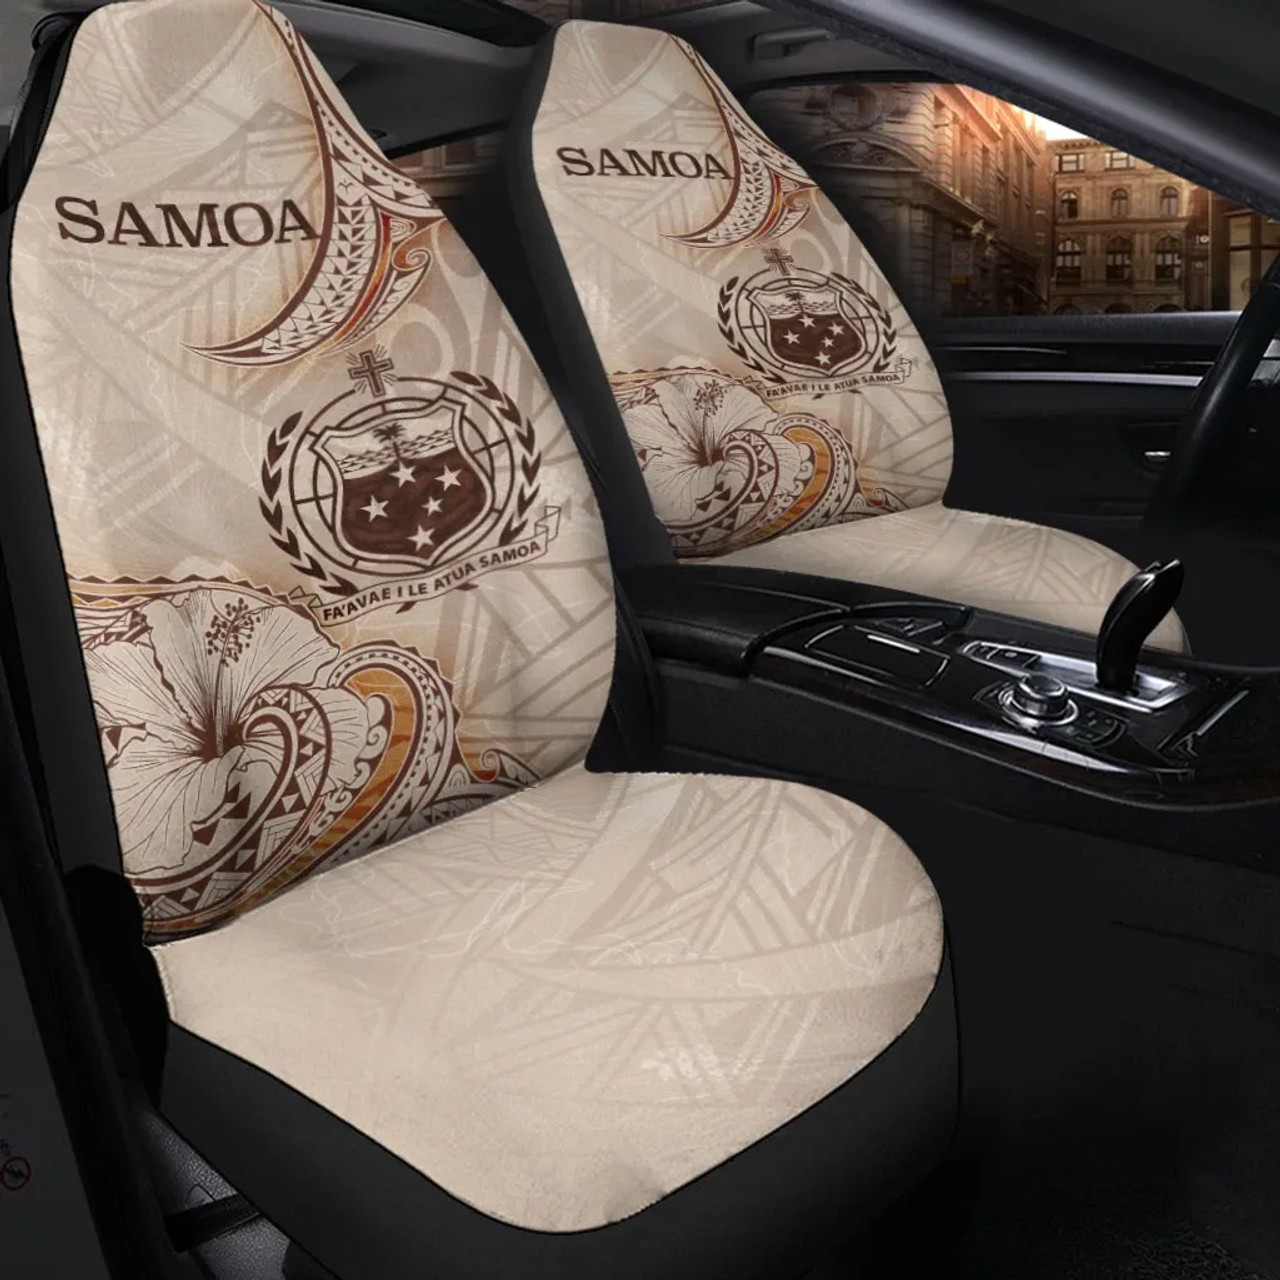 Samoa Car Seat Cover - Hibiscus Flowers Vintage Style